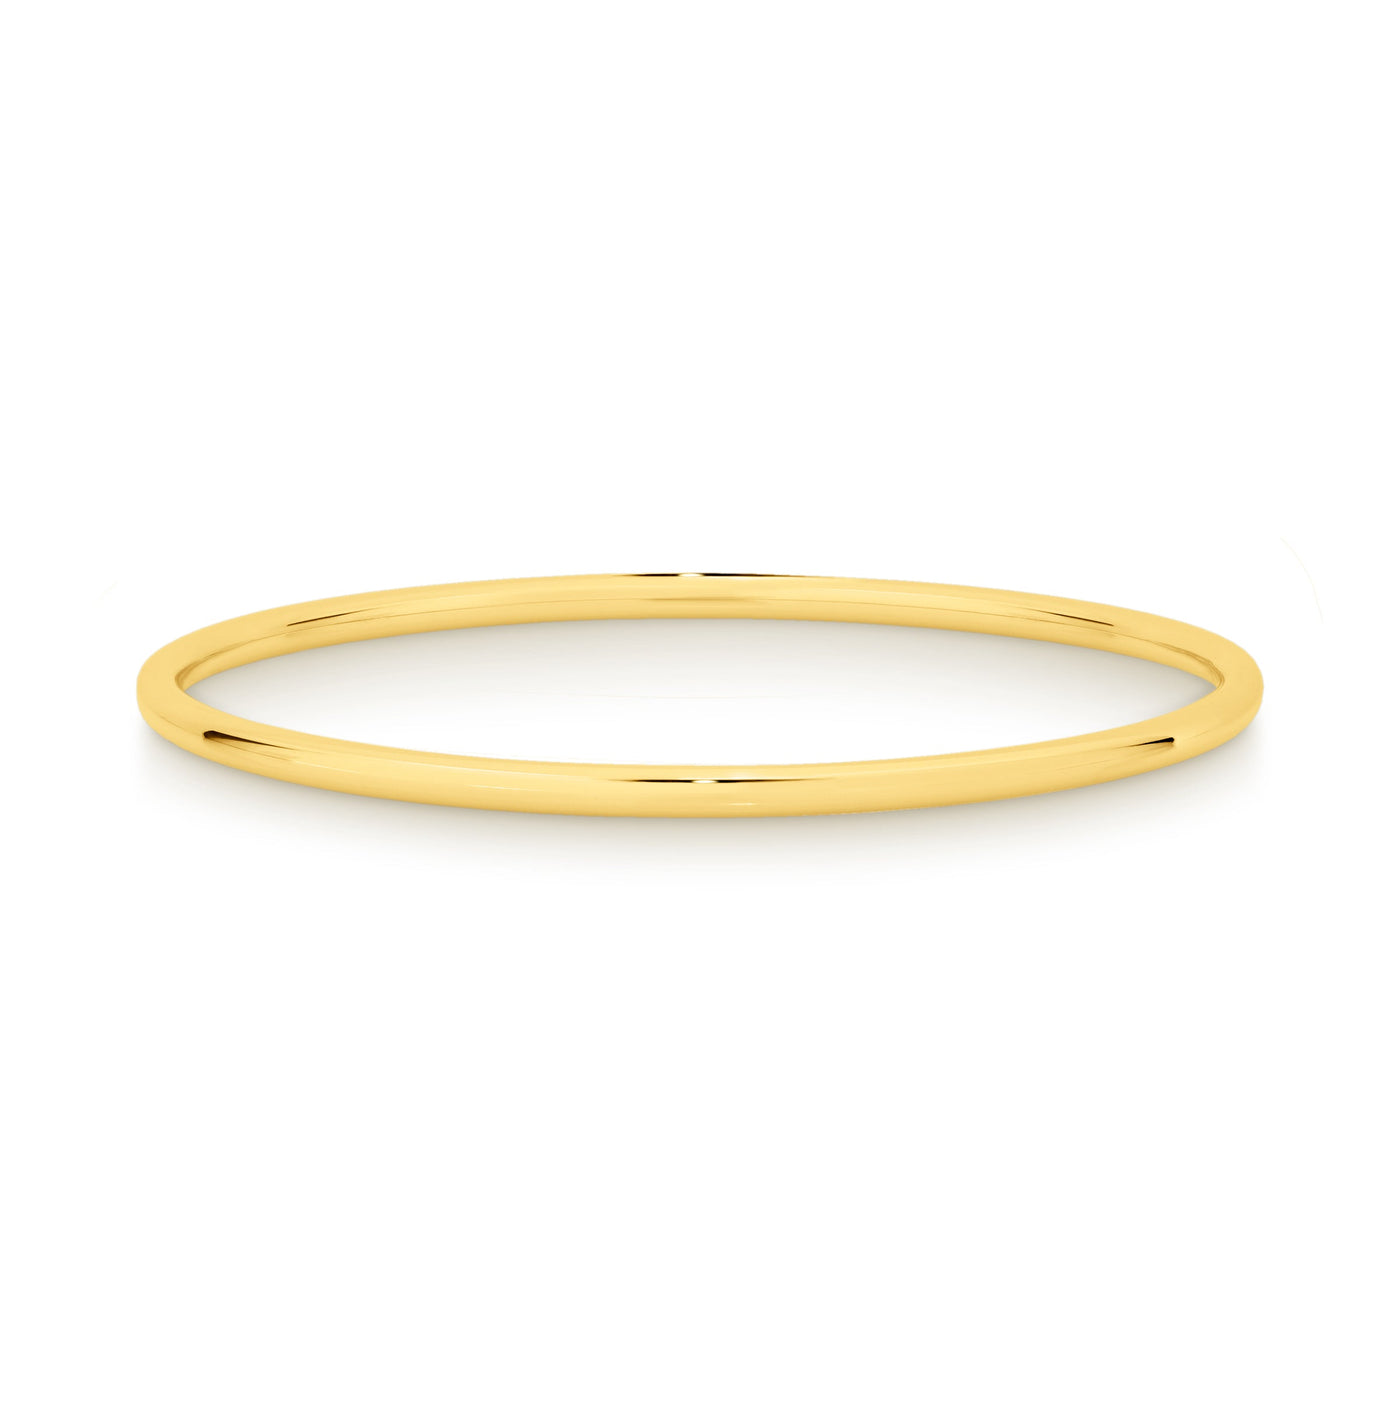 9k Yellow Gold & Sterling Silver Bangle